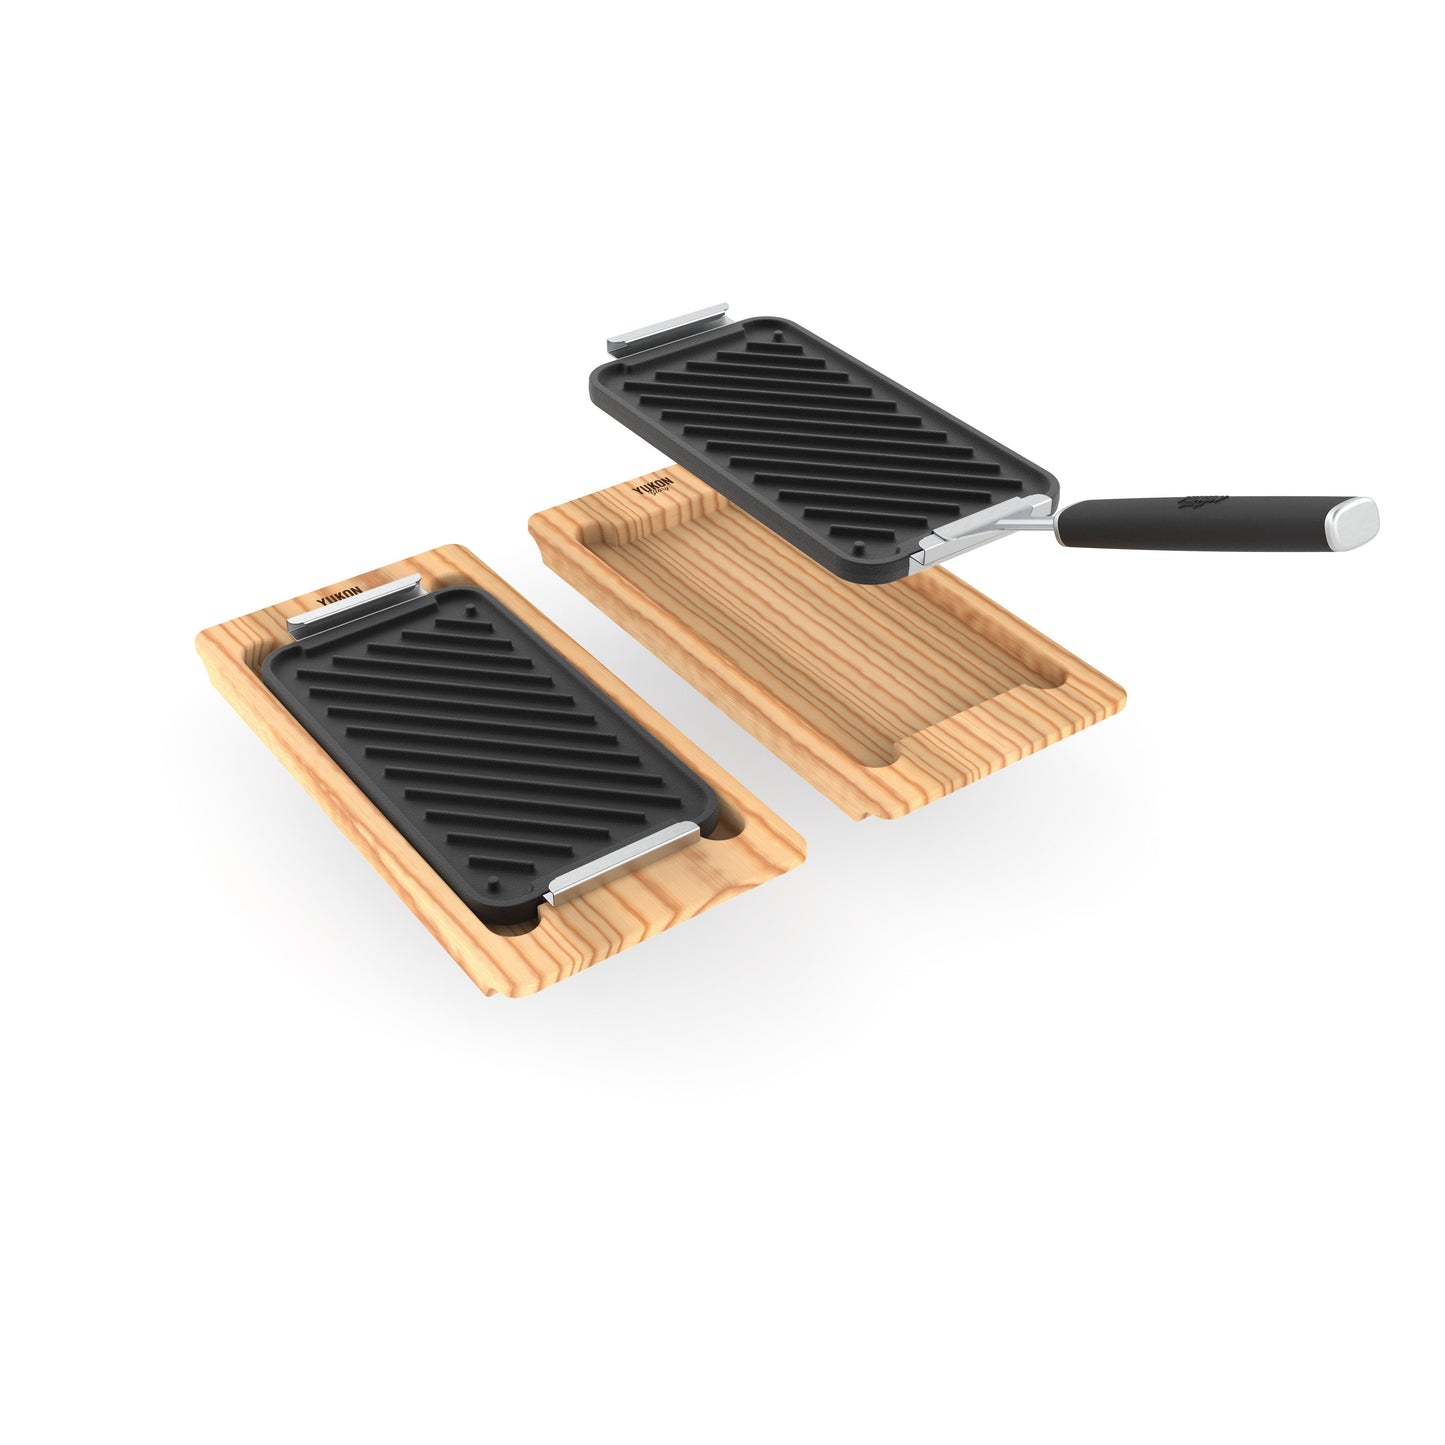 Cast Iron and Wooden Tray Set